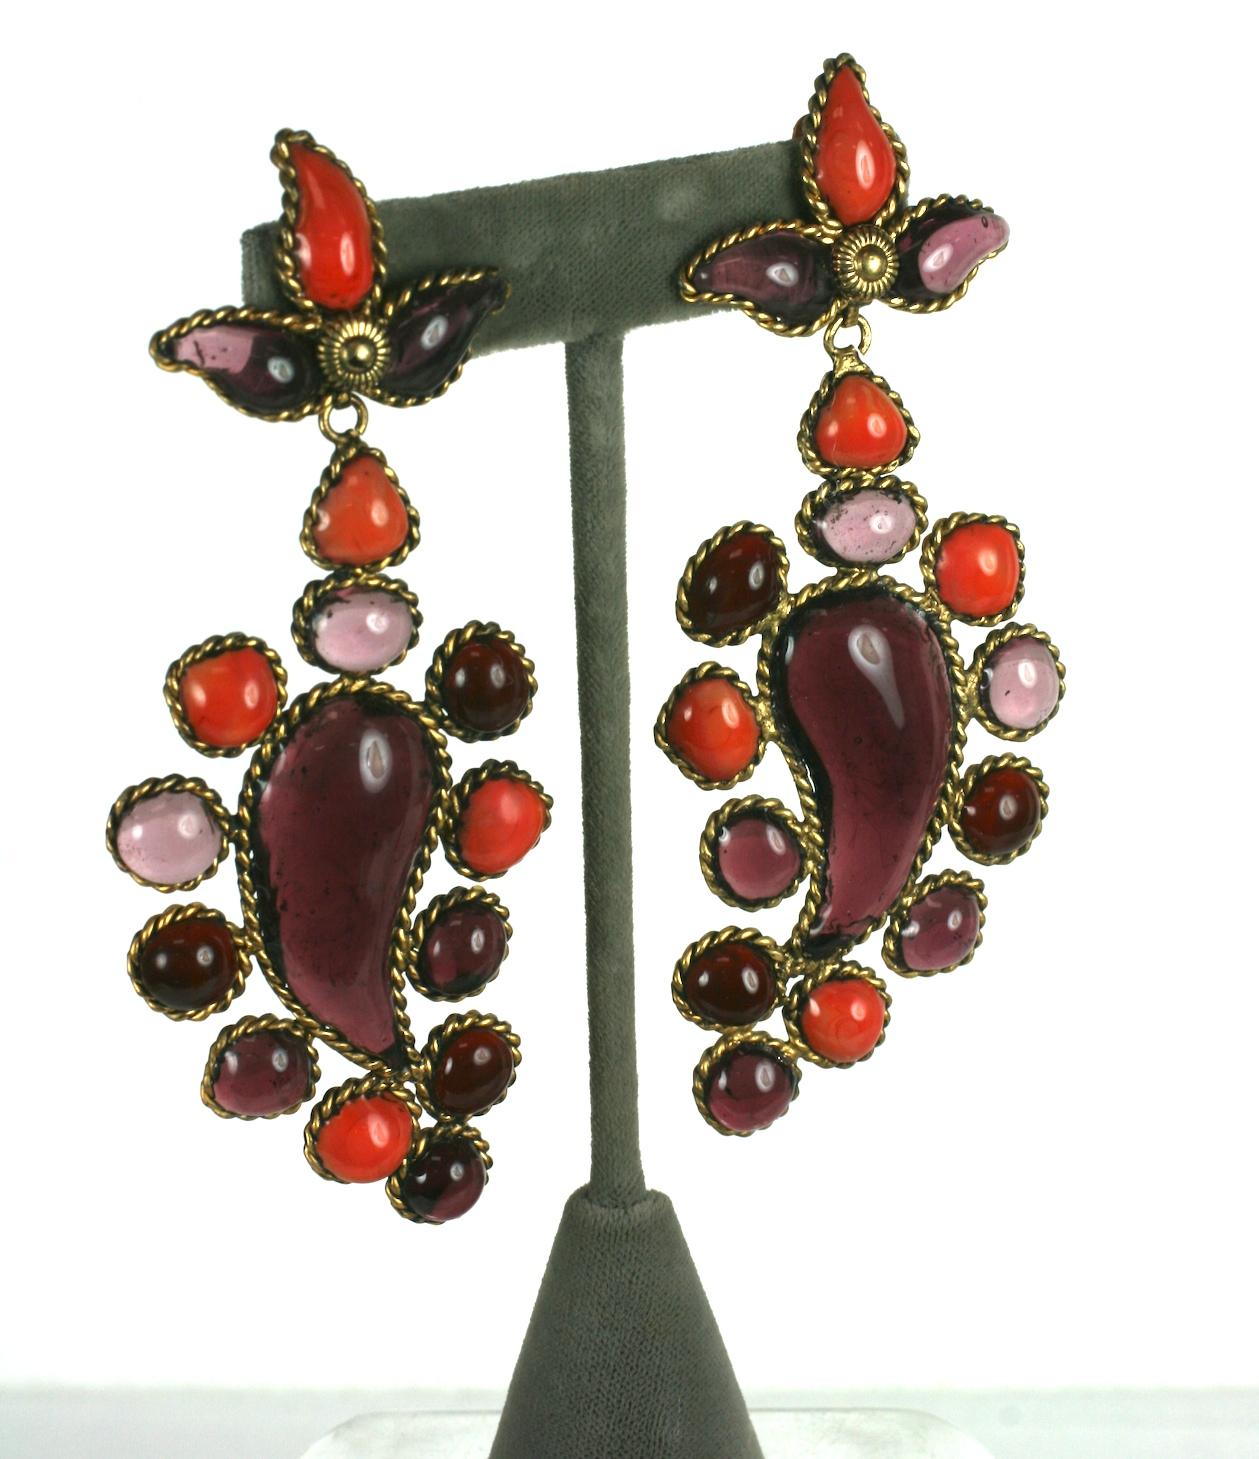 Maison Gripoix for Yves Saint Laurent Anglo Indian palmette long earrings made of coral and two shades of amythest poured glass enamel. Set in spun gilt bronze wire. Spring/Summer 1982 Haute Couture Collection. Clip back fittings.
The earrings are